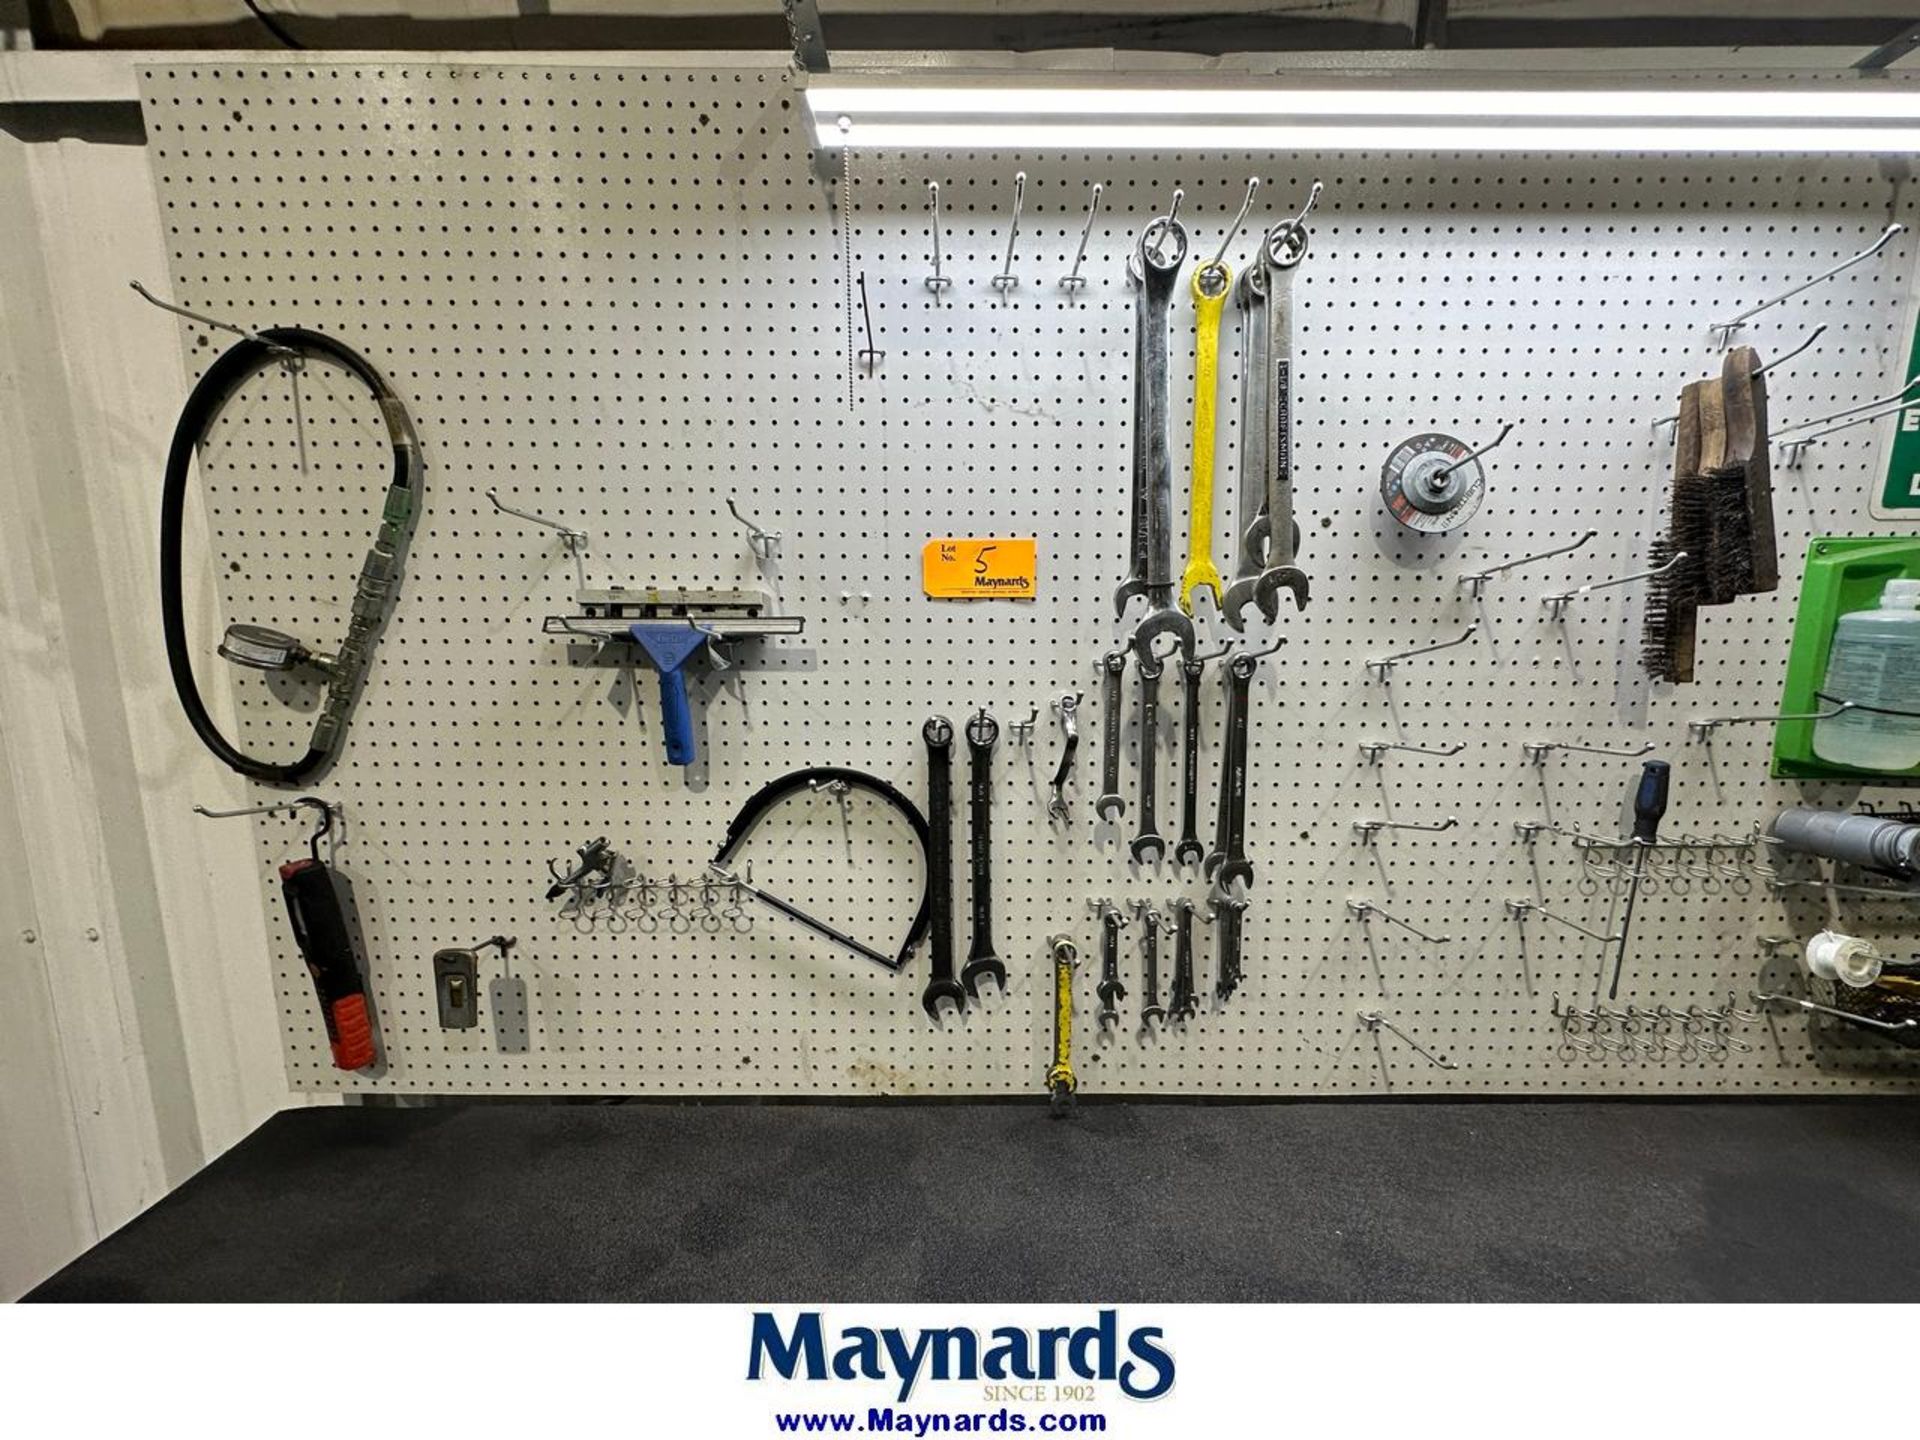 Lot of Tools and Contents on Wall - Image 2 of 3